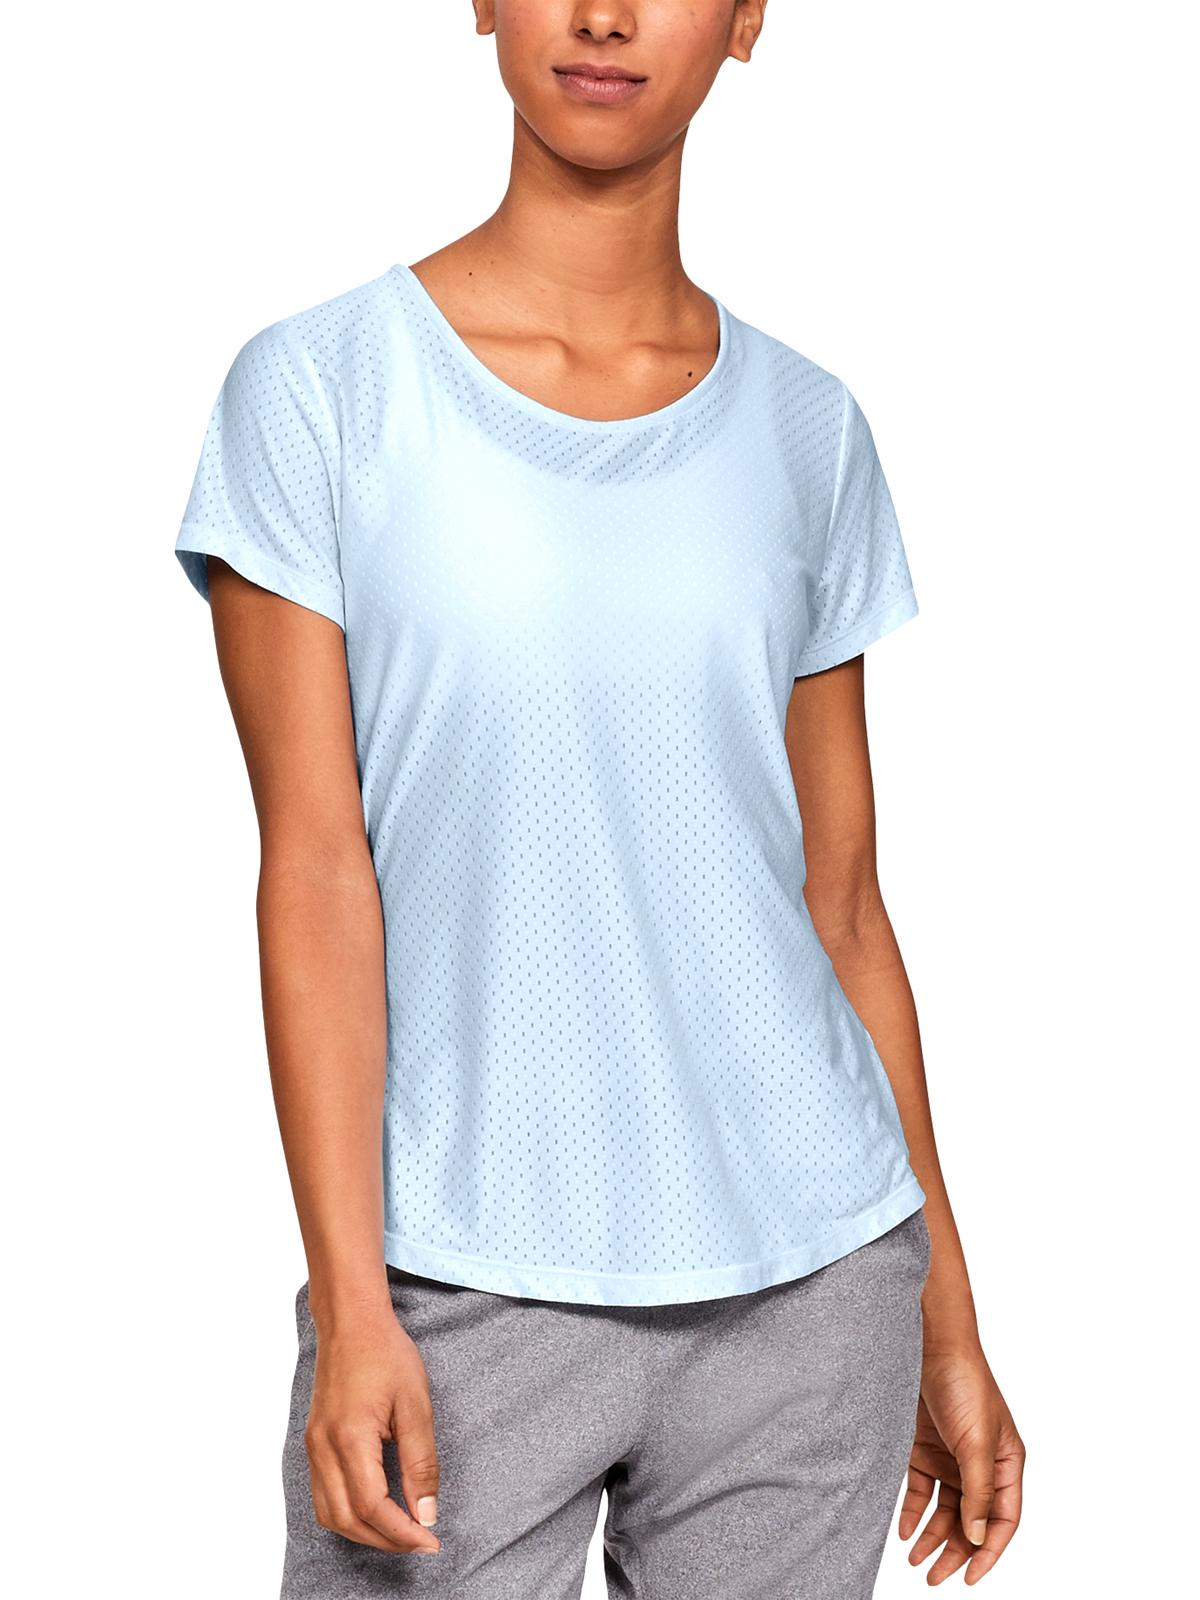 Under Armour Womens Running Fitness T-Shirt - image 1 of 2